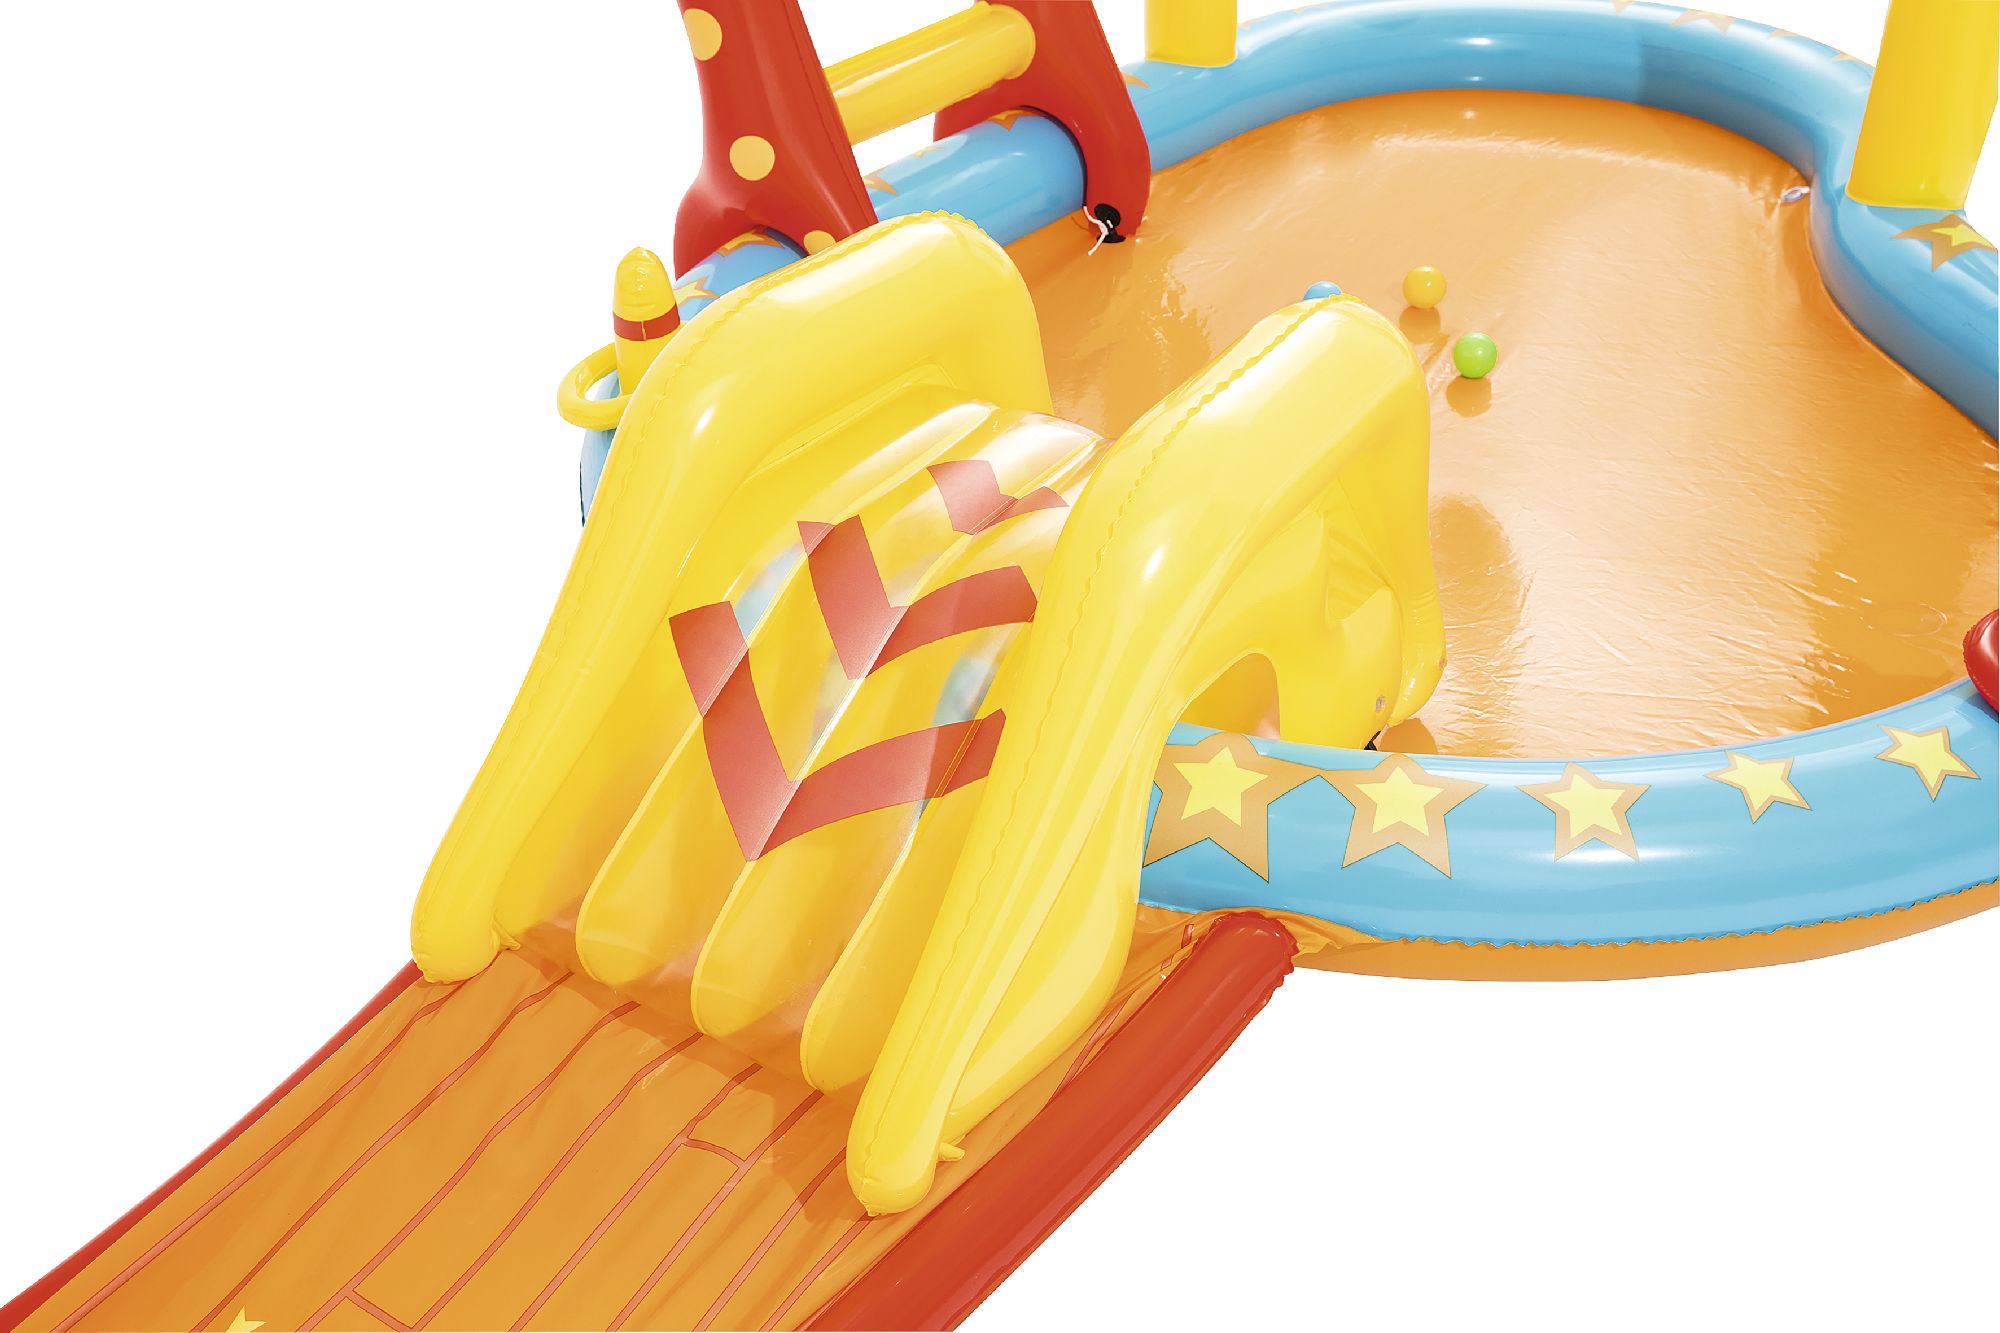 Play center piccolo campione lil' champ - Bestway